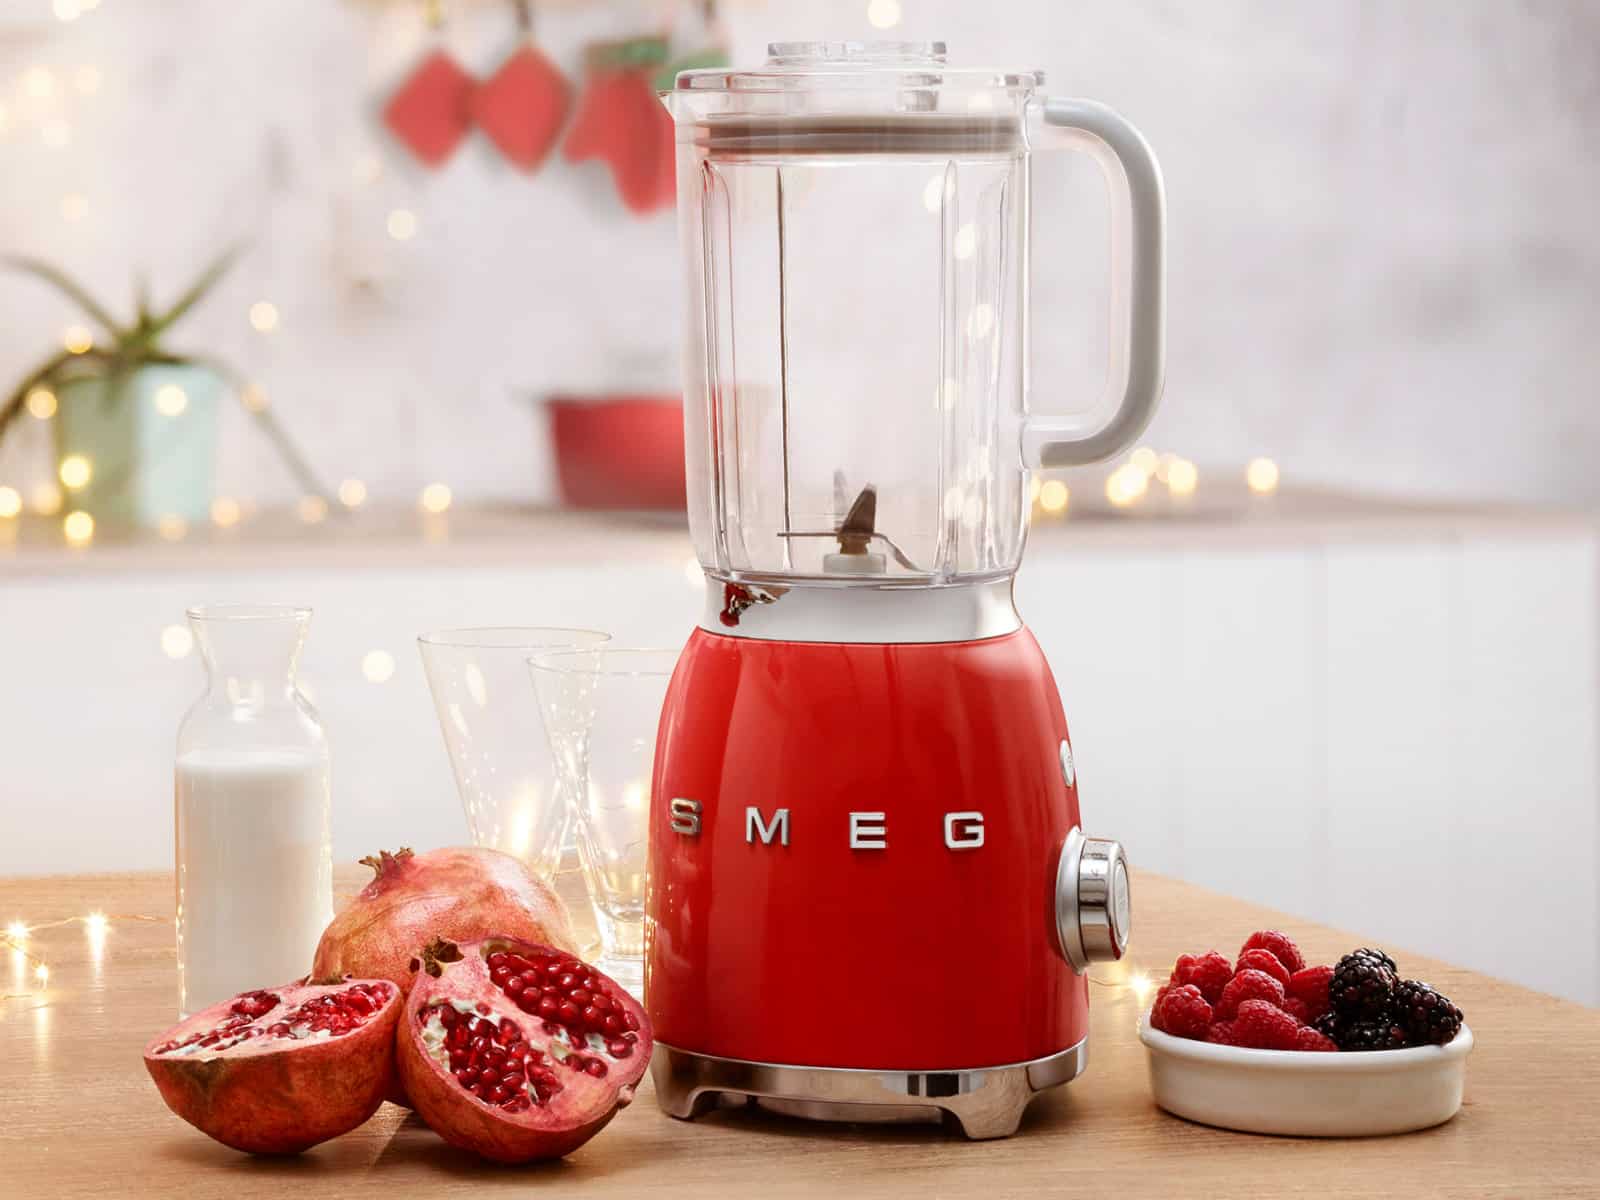 Read more about the article Smeg 50s Retro Blender Video